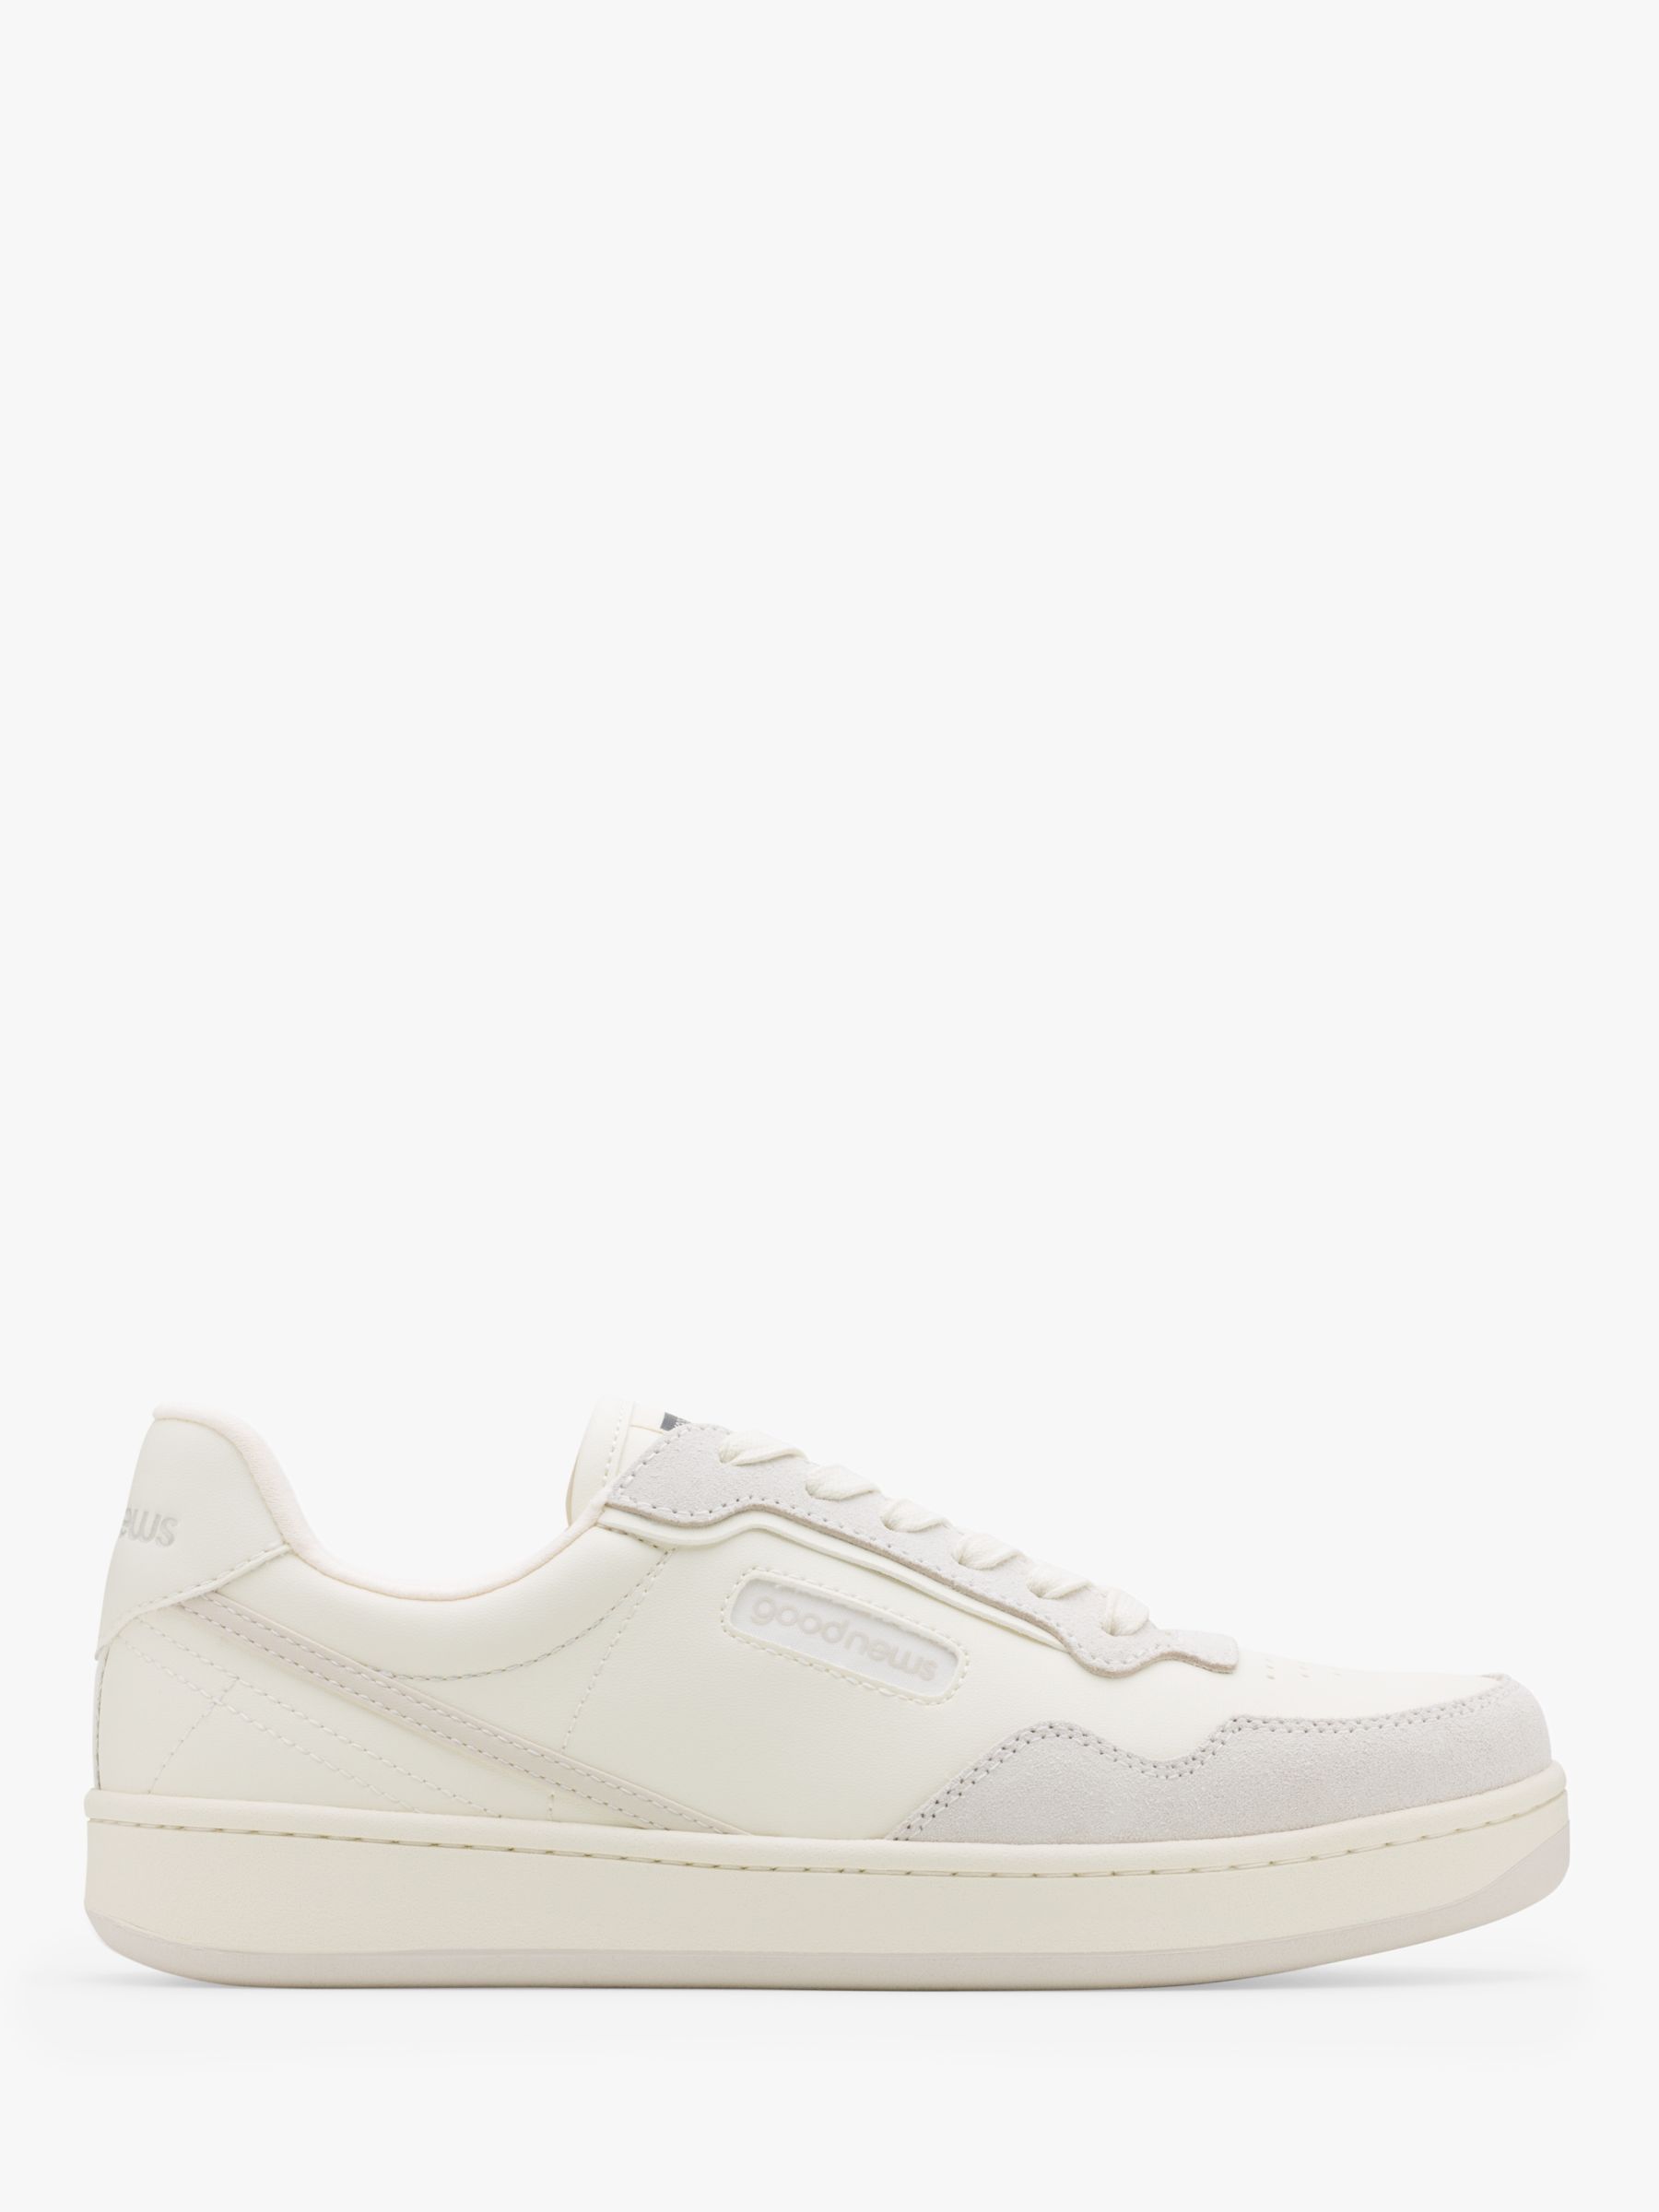 Good News Mack 23 Low Top Trainers, White, White at John Lewis & Partners